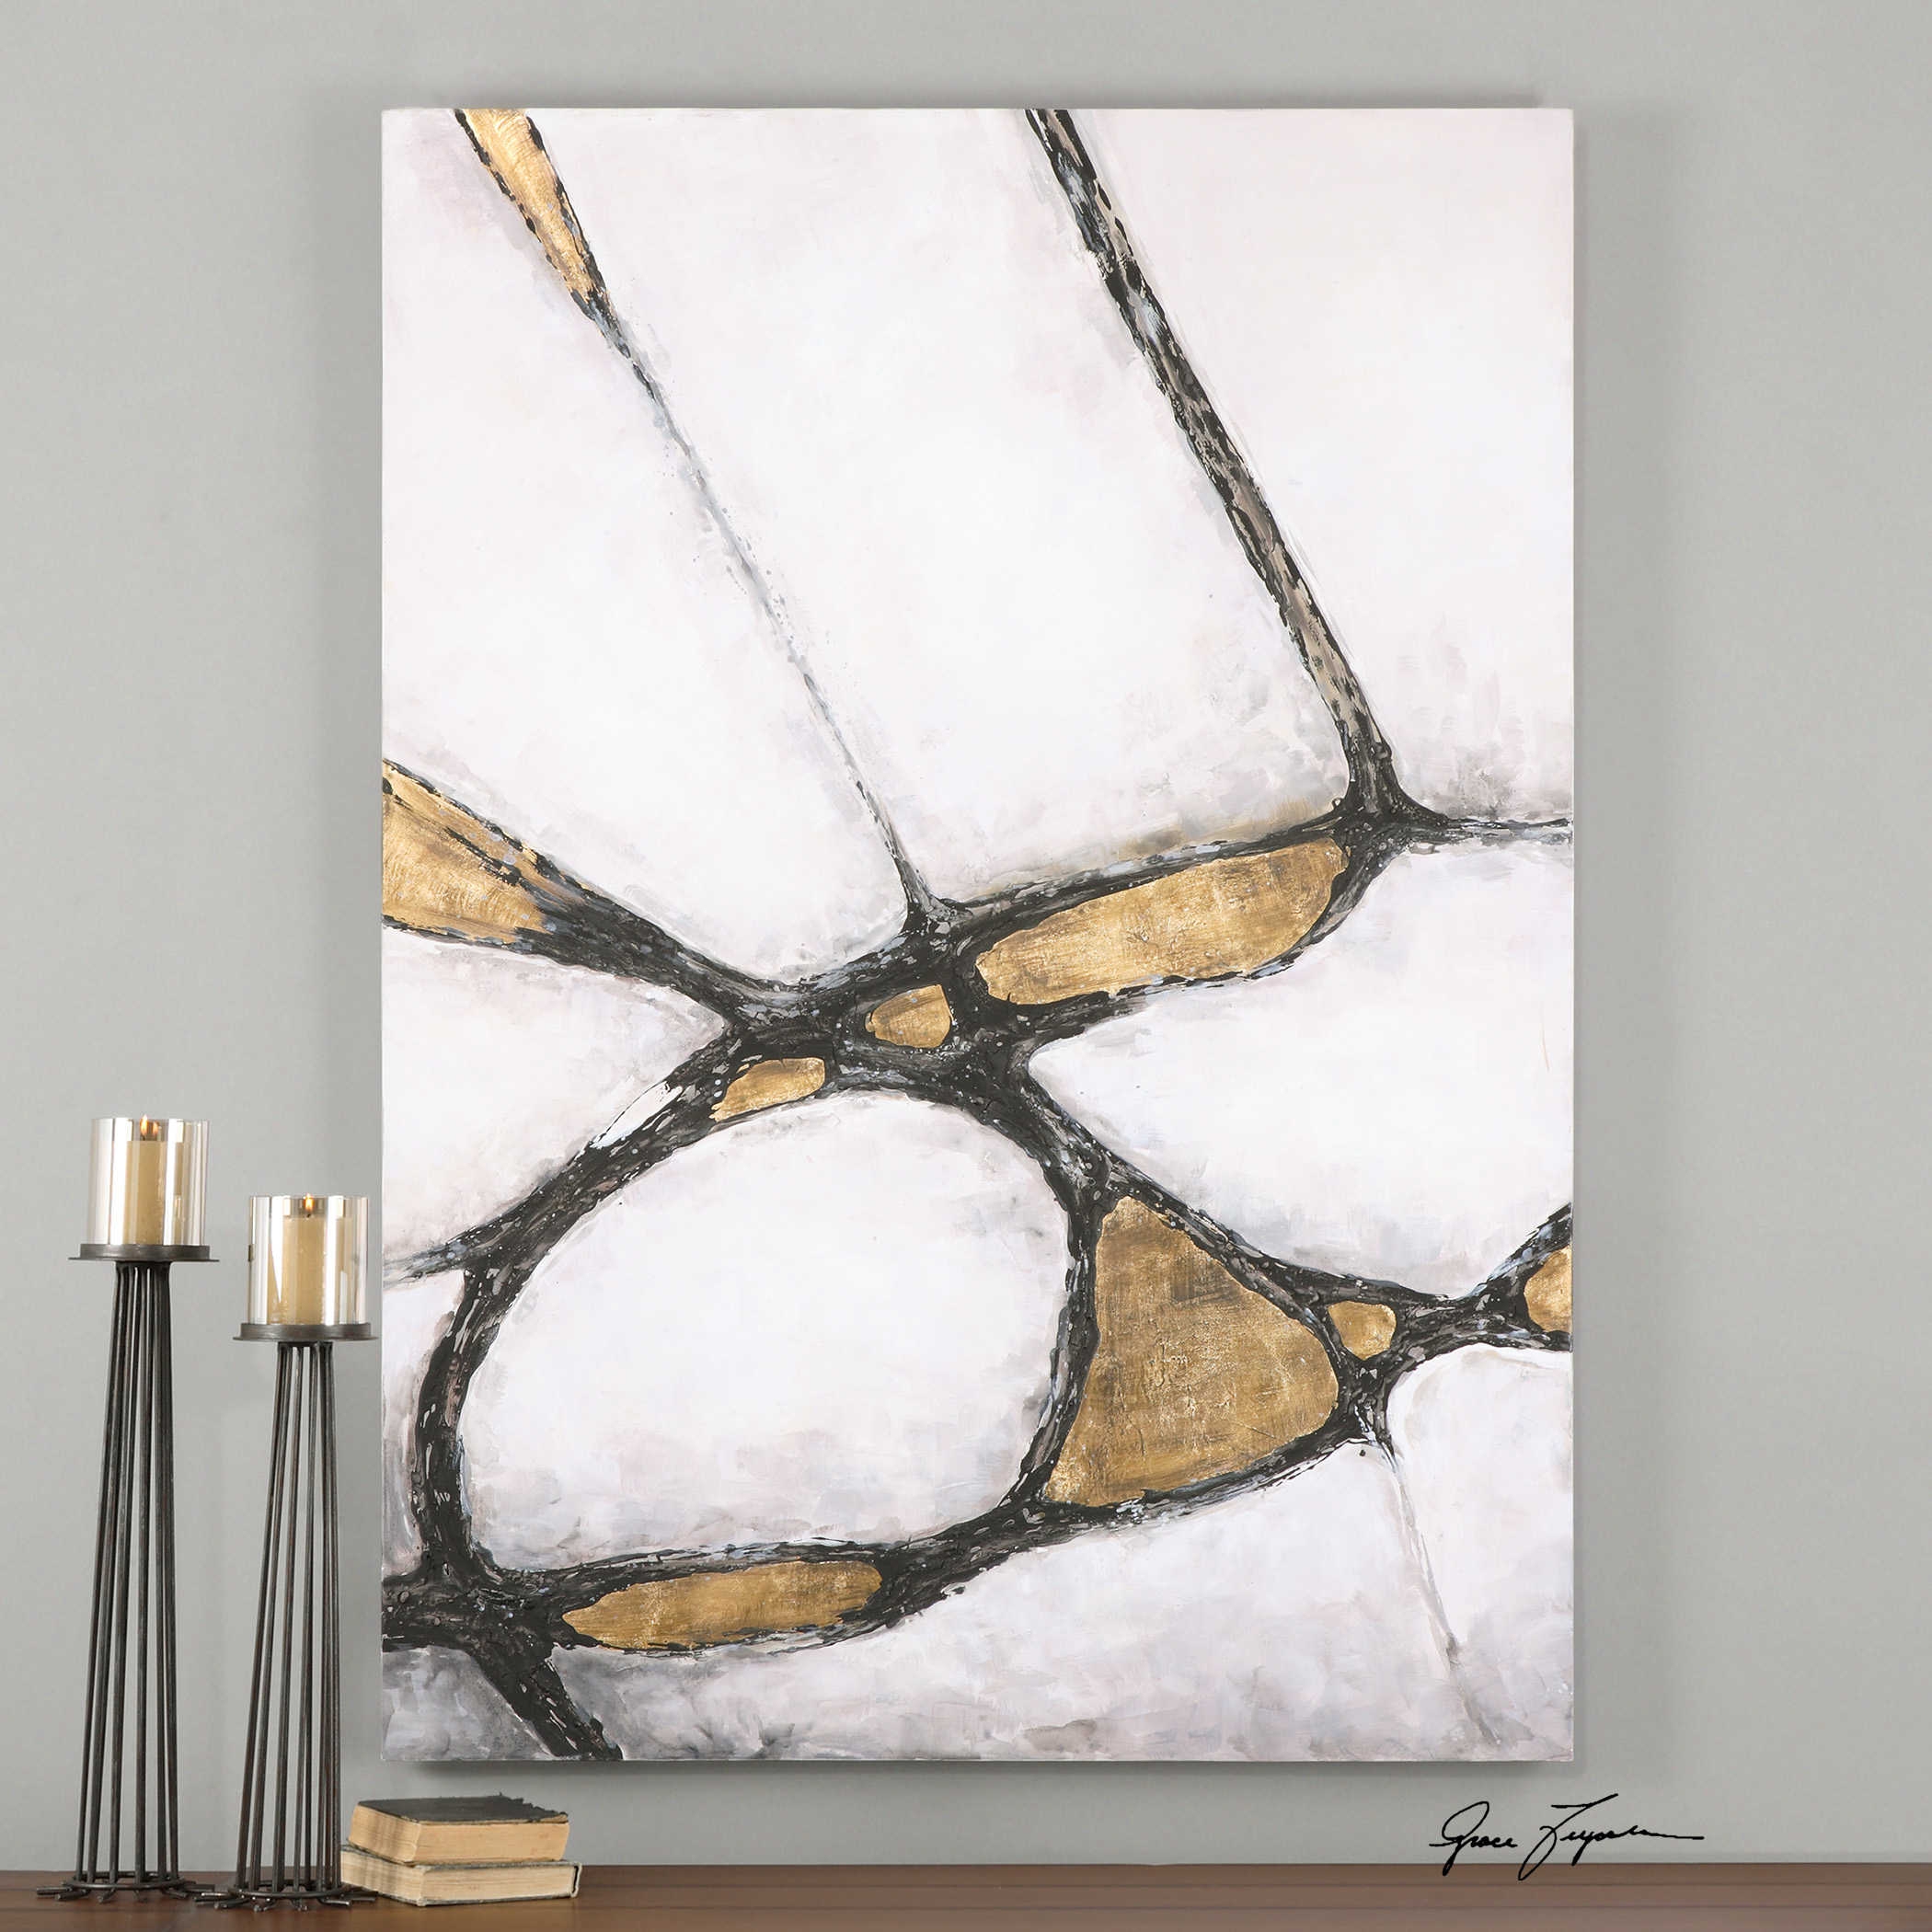 ABSTRACT IN GOLD AND BLACK HAND PAINTED CANVAS - Image 0